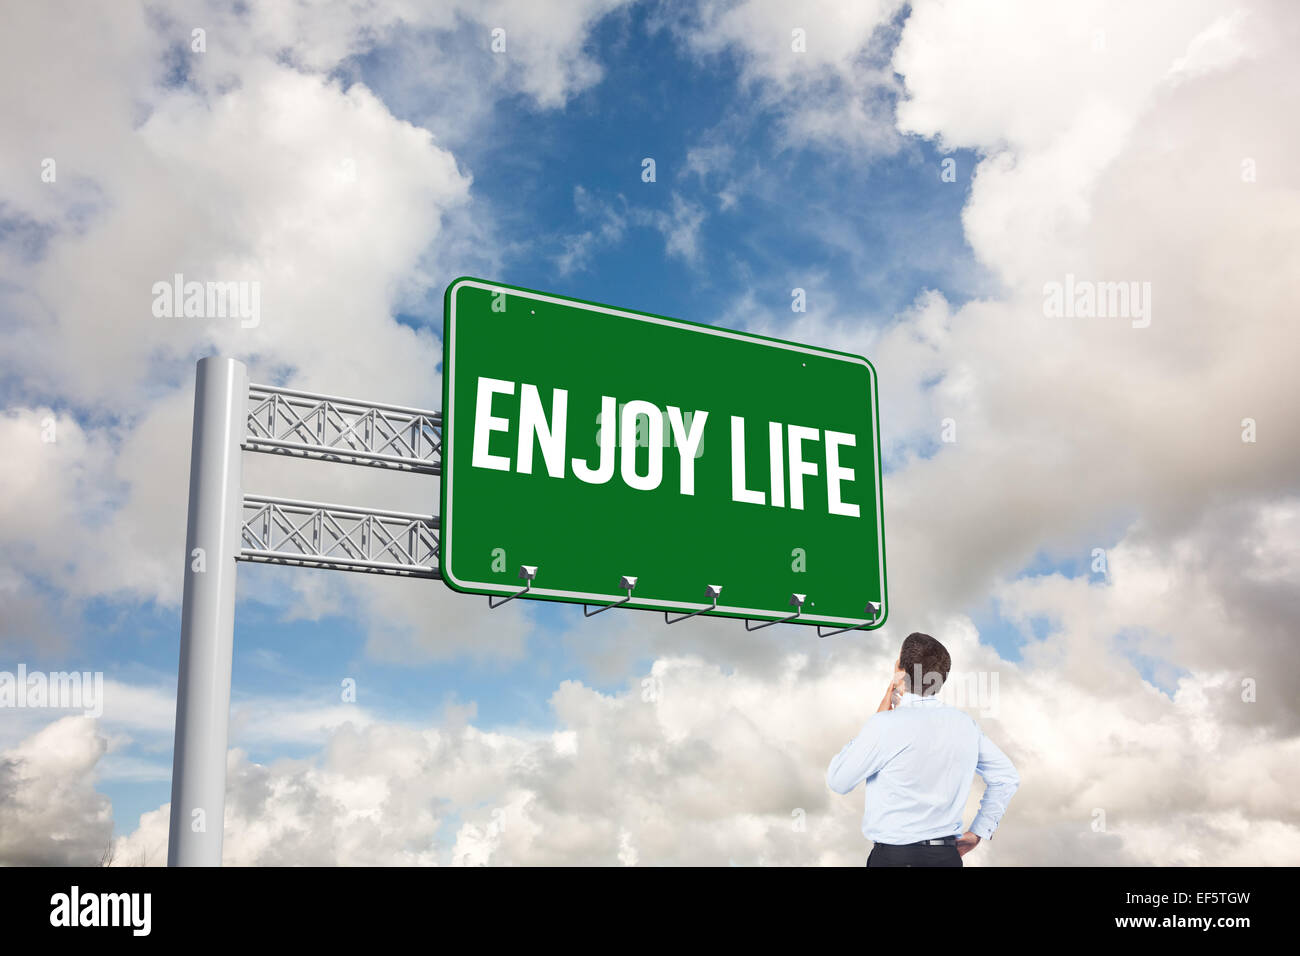 Enjoy life against blue sky with white clouds Stock Photo